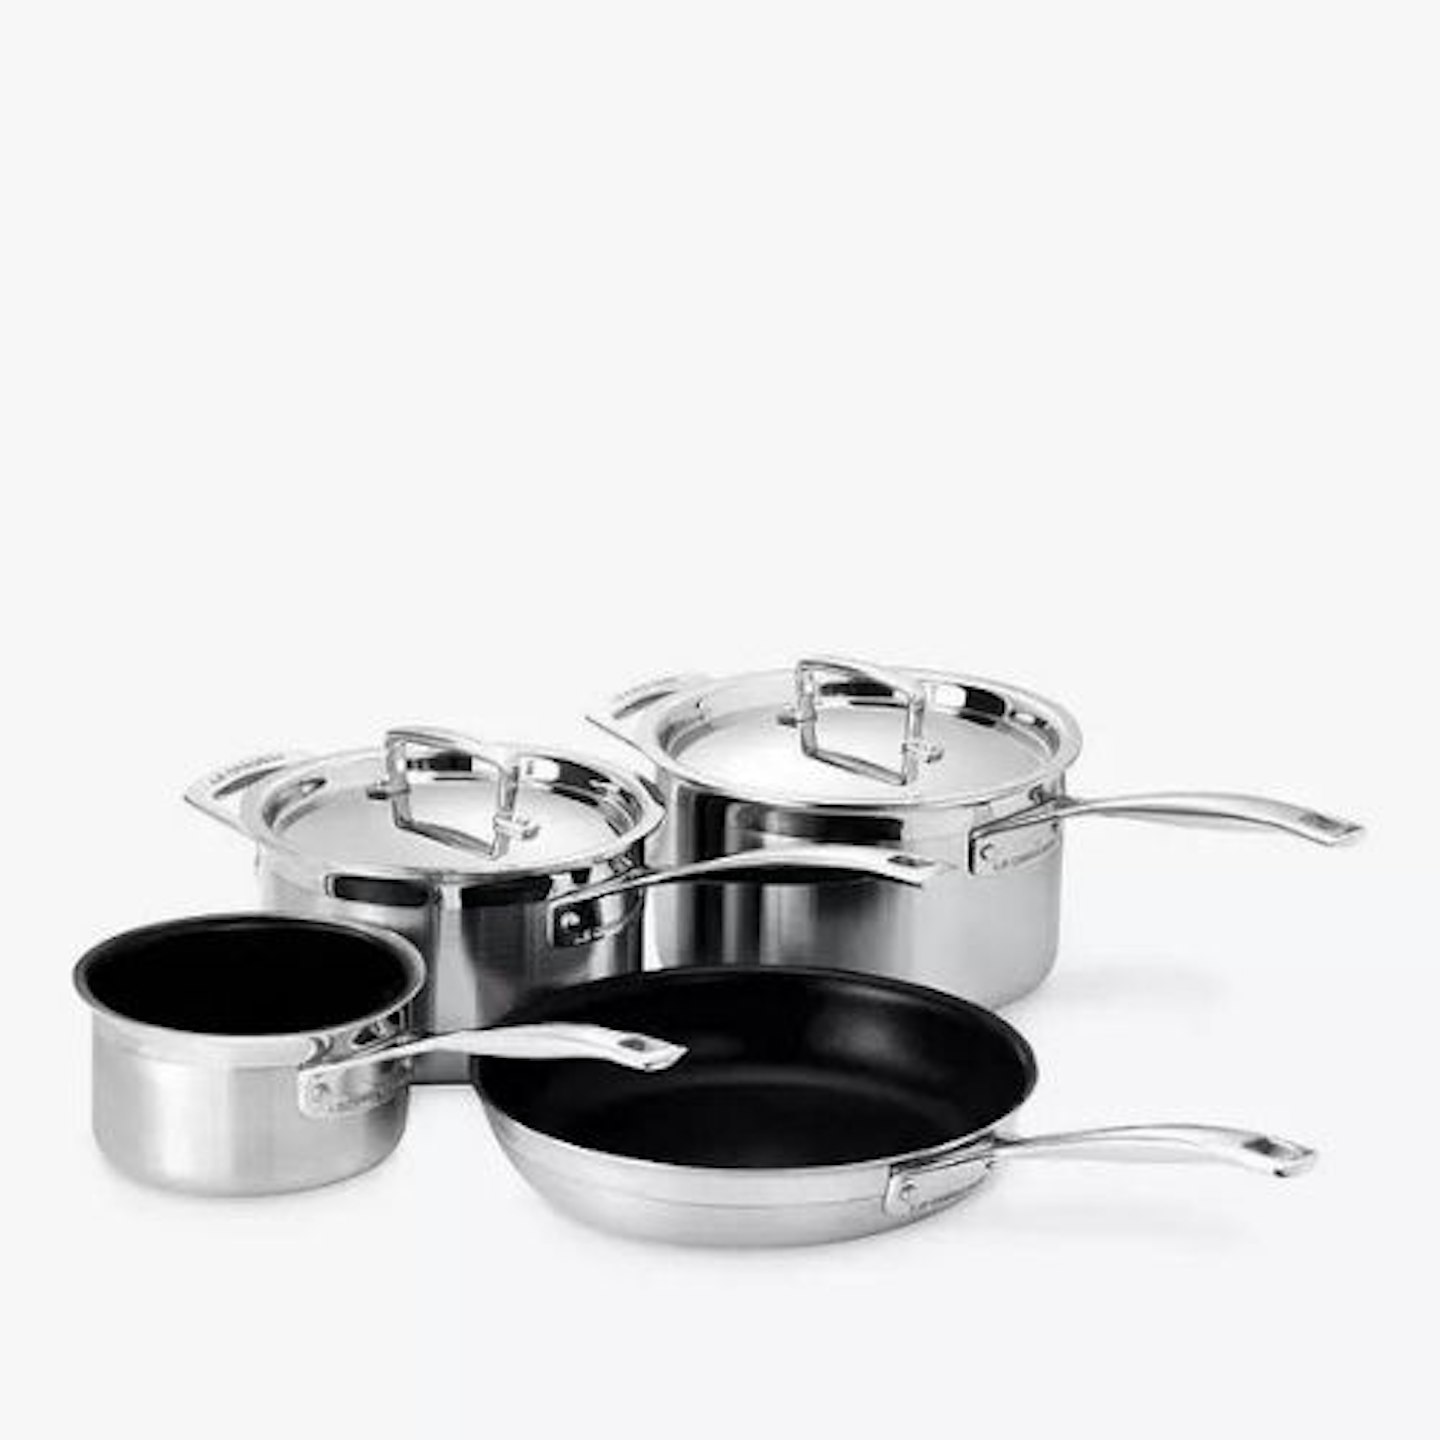 Le Creuset 3-Ply Stainless Steel Saucepans and Frying Pan Set